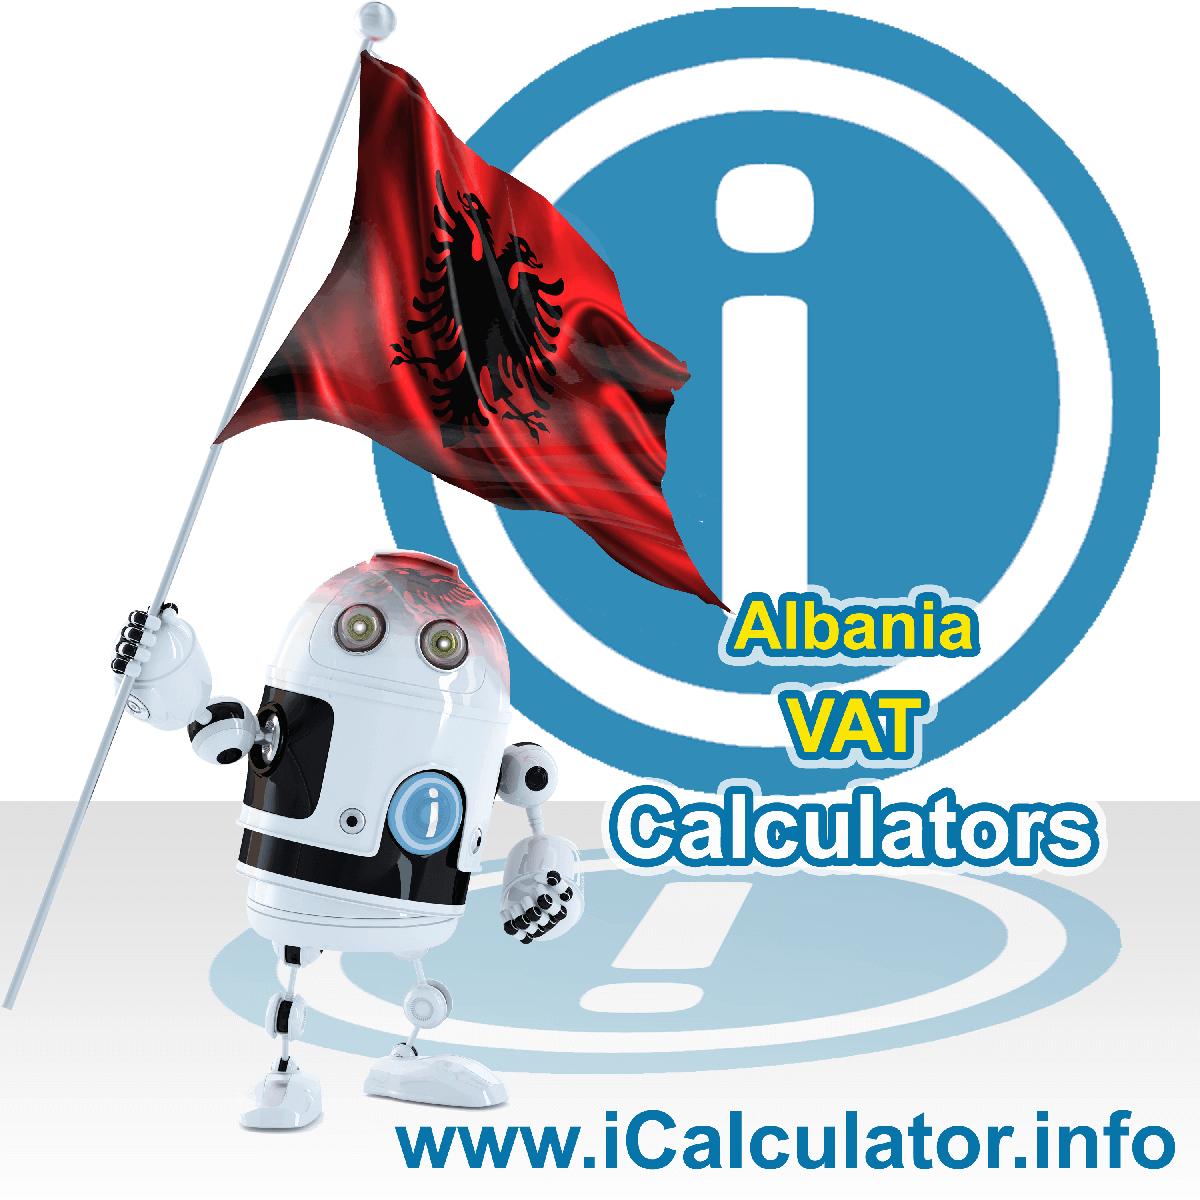 Albania VAT Calculator. This image shows the Albania flag and information relating to the VAT formula used for calculating Value Added Tax in Albania using the Albania VAT Calculator in 2022